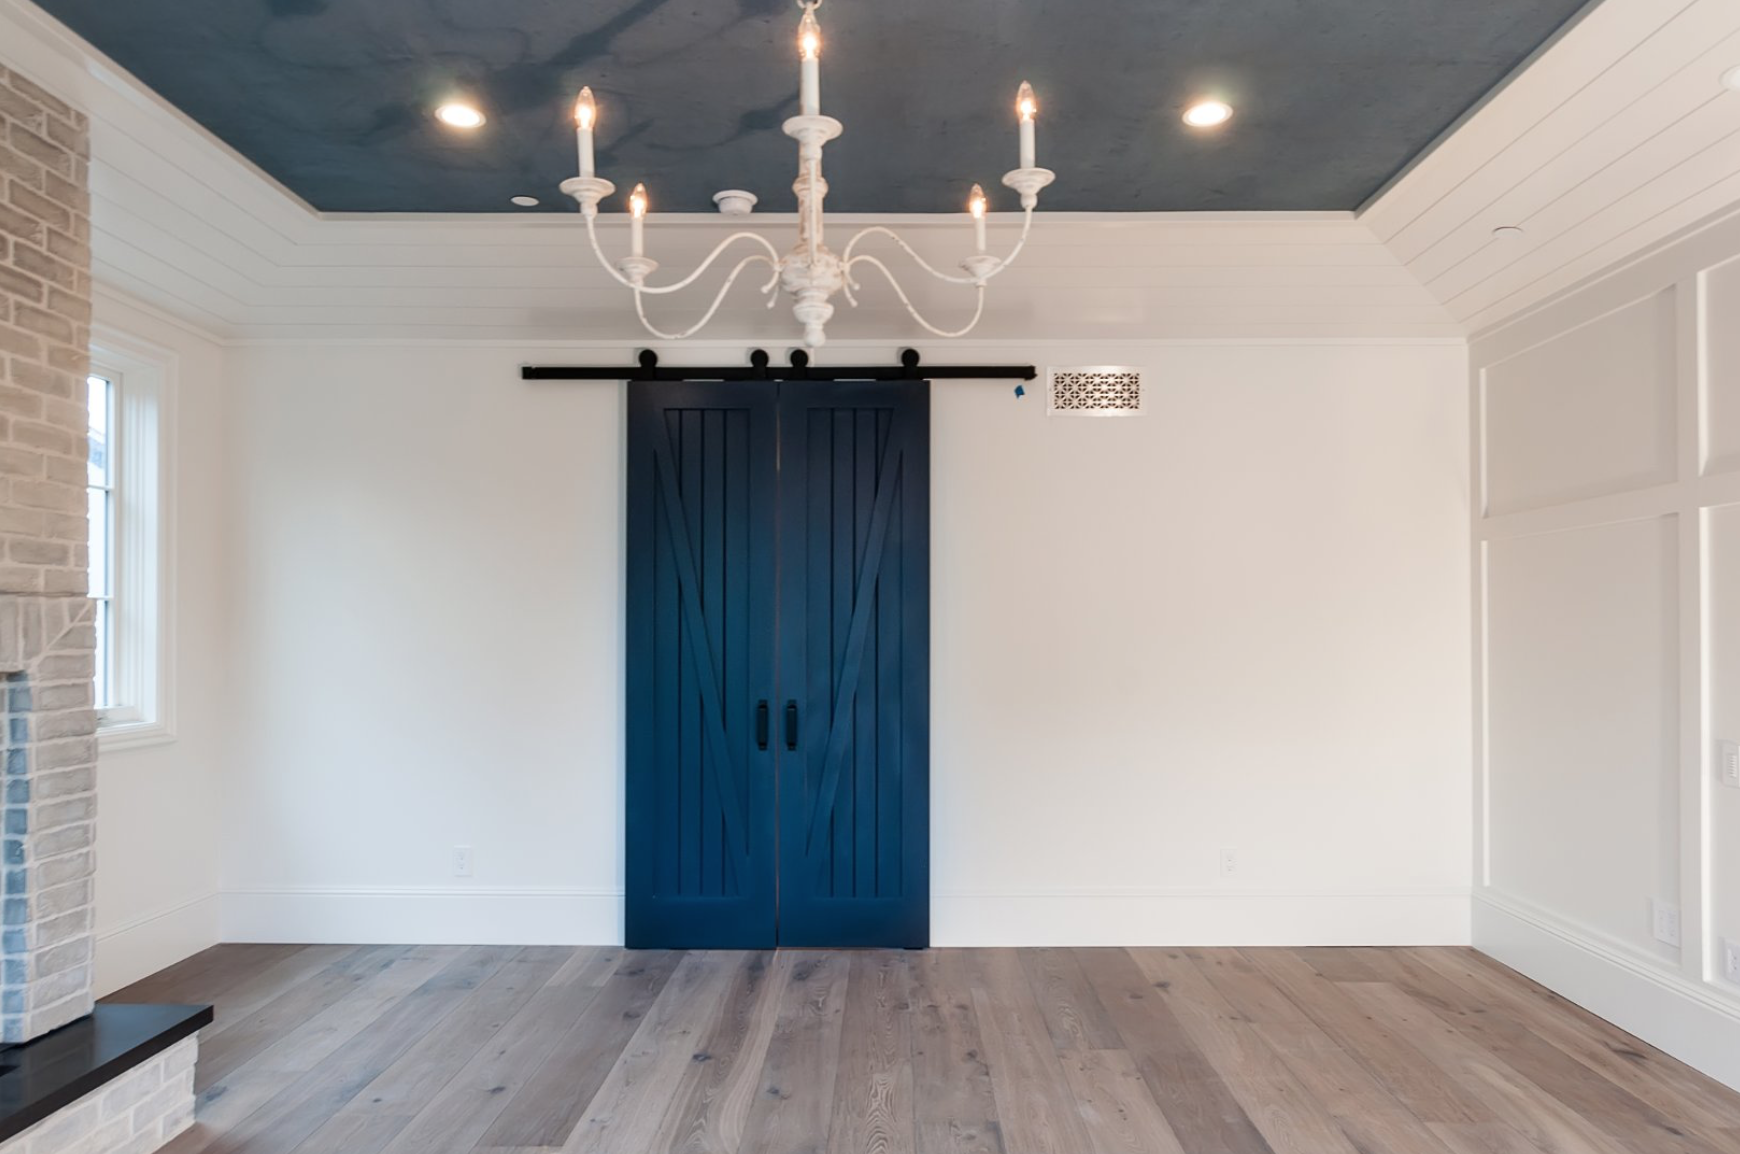 barn doors painted in modern, funky colors as both a design statement and as a way to make a room more flexible, you can section off a smaller room or keep it open.